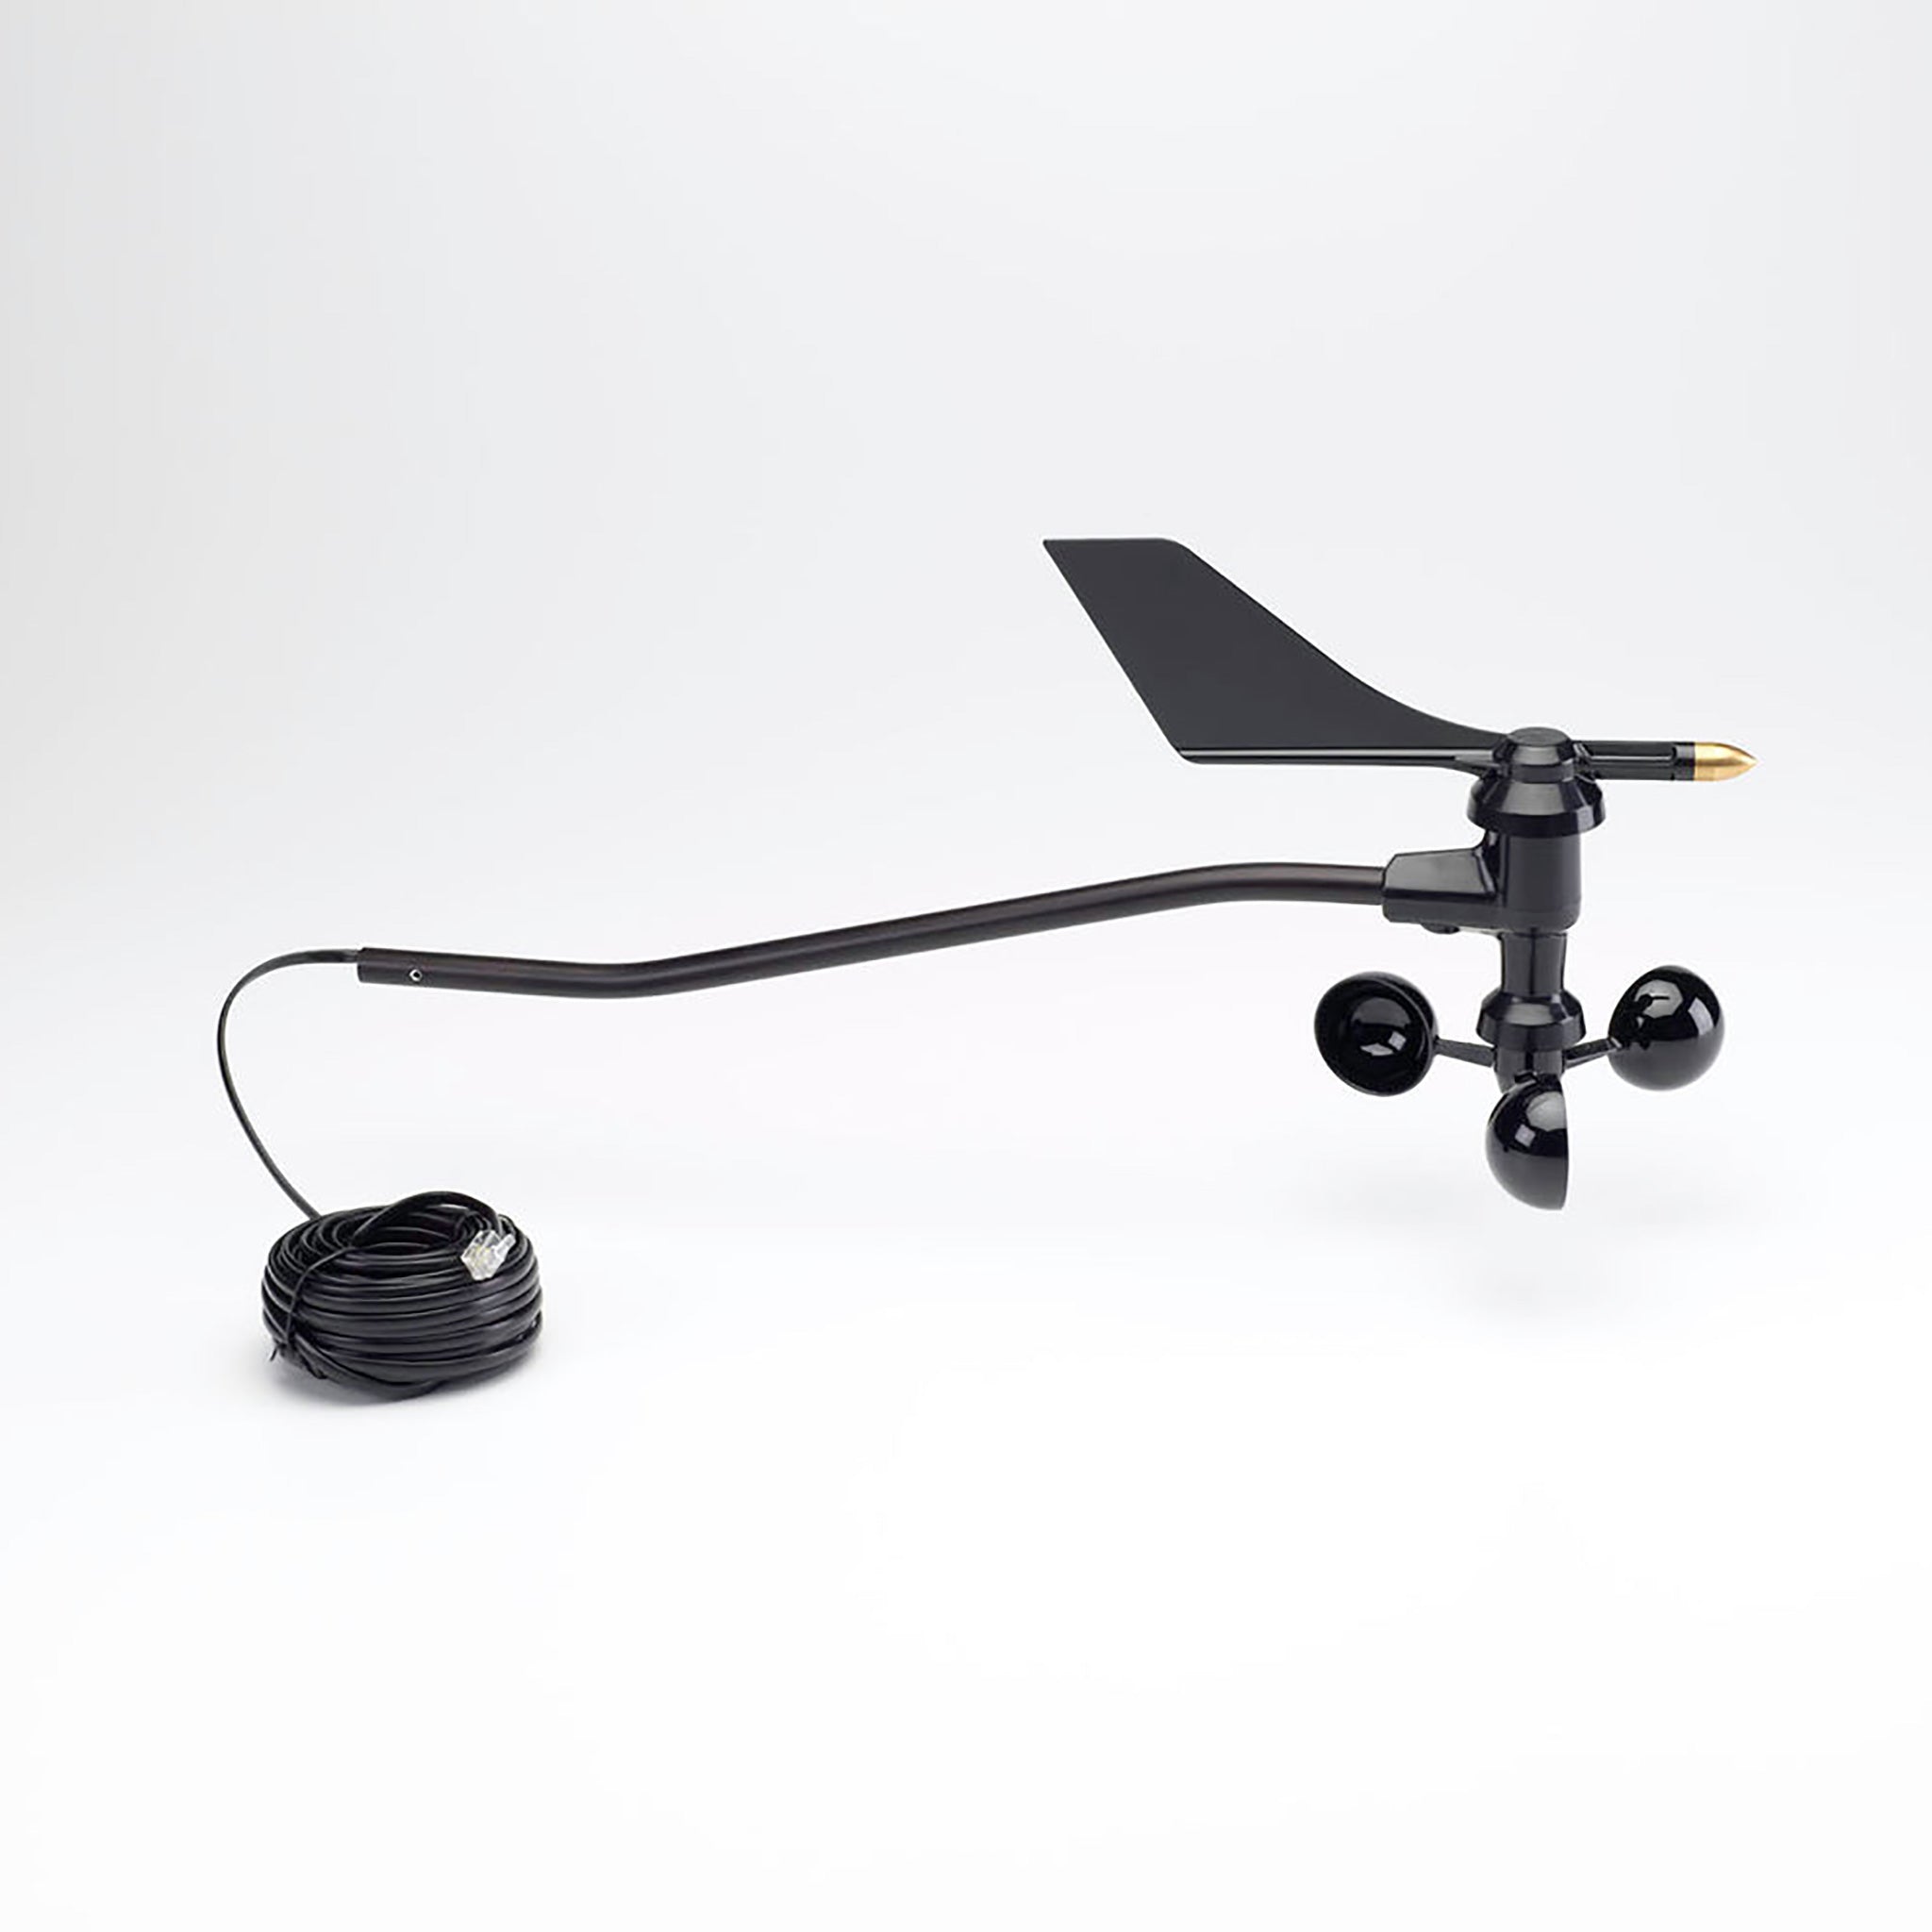 Anemometer for Weather Monitor or Wizard - SKU 7911